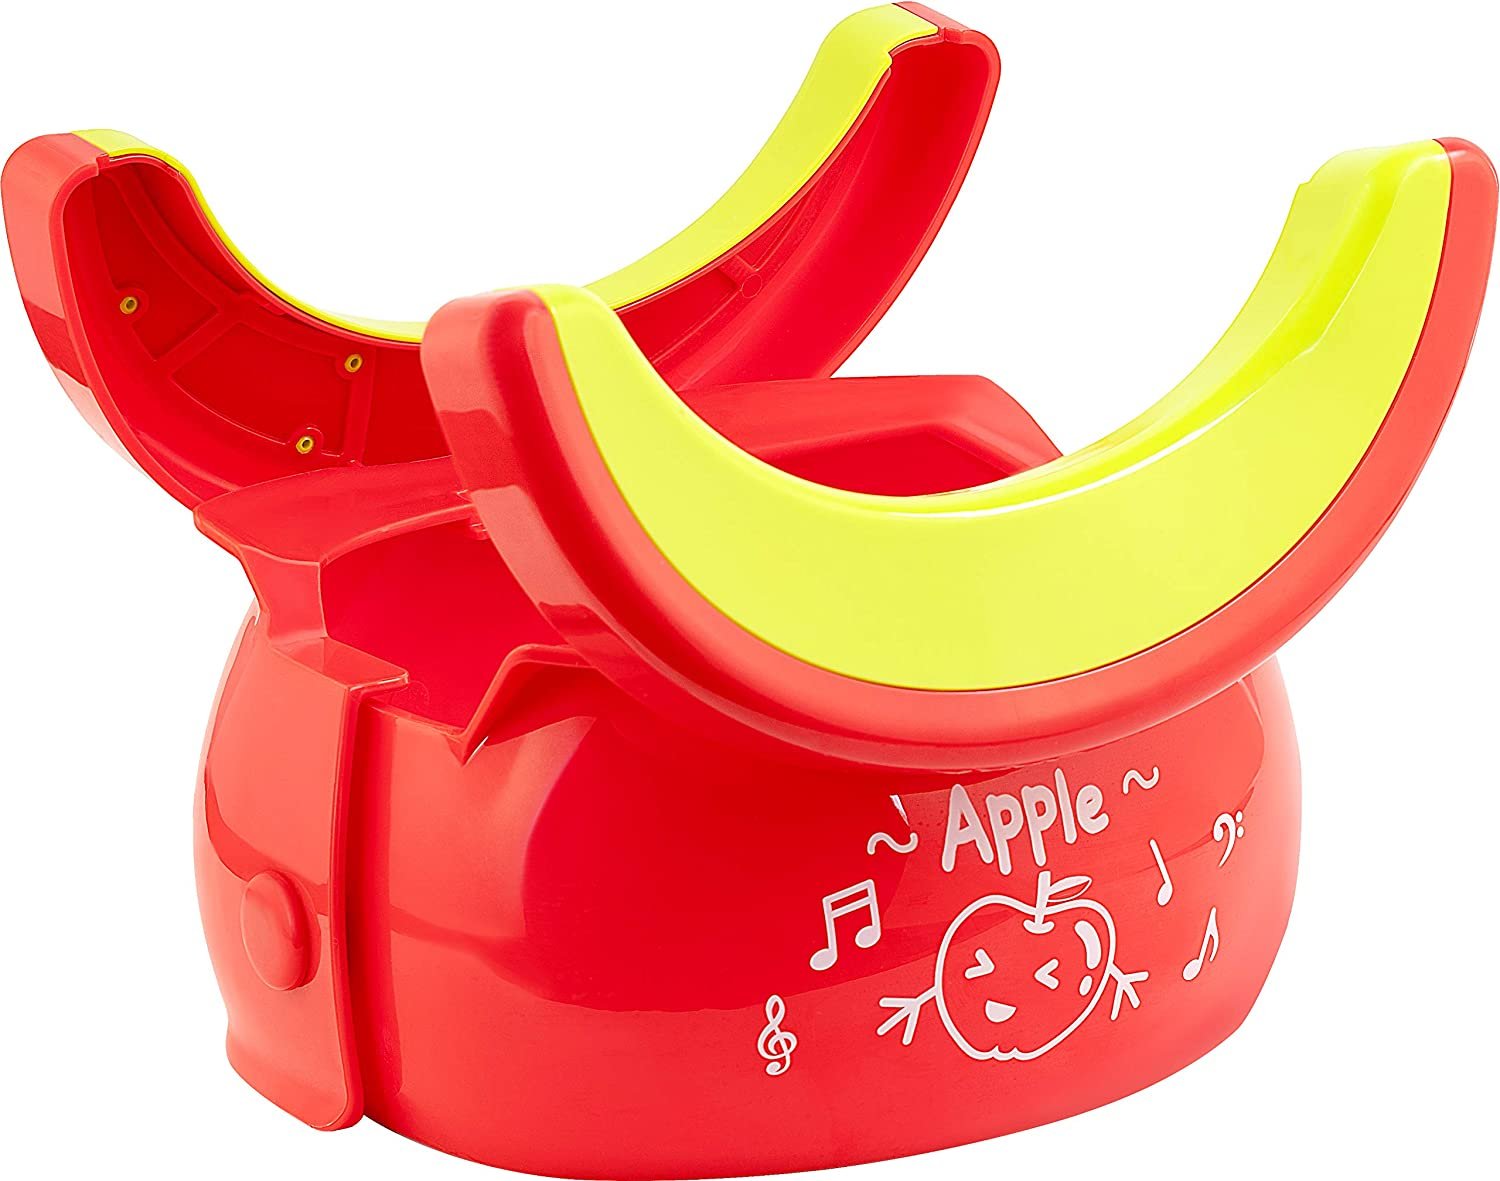 Travel Toilet Seat & Potty Trainer for Kids with Splash Guard, Apple,  Free Shipping & Returns